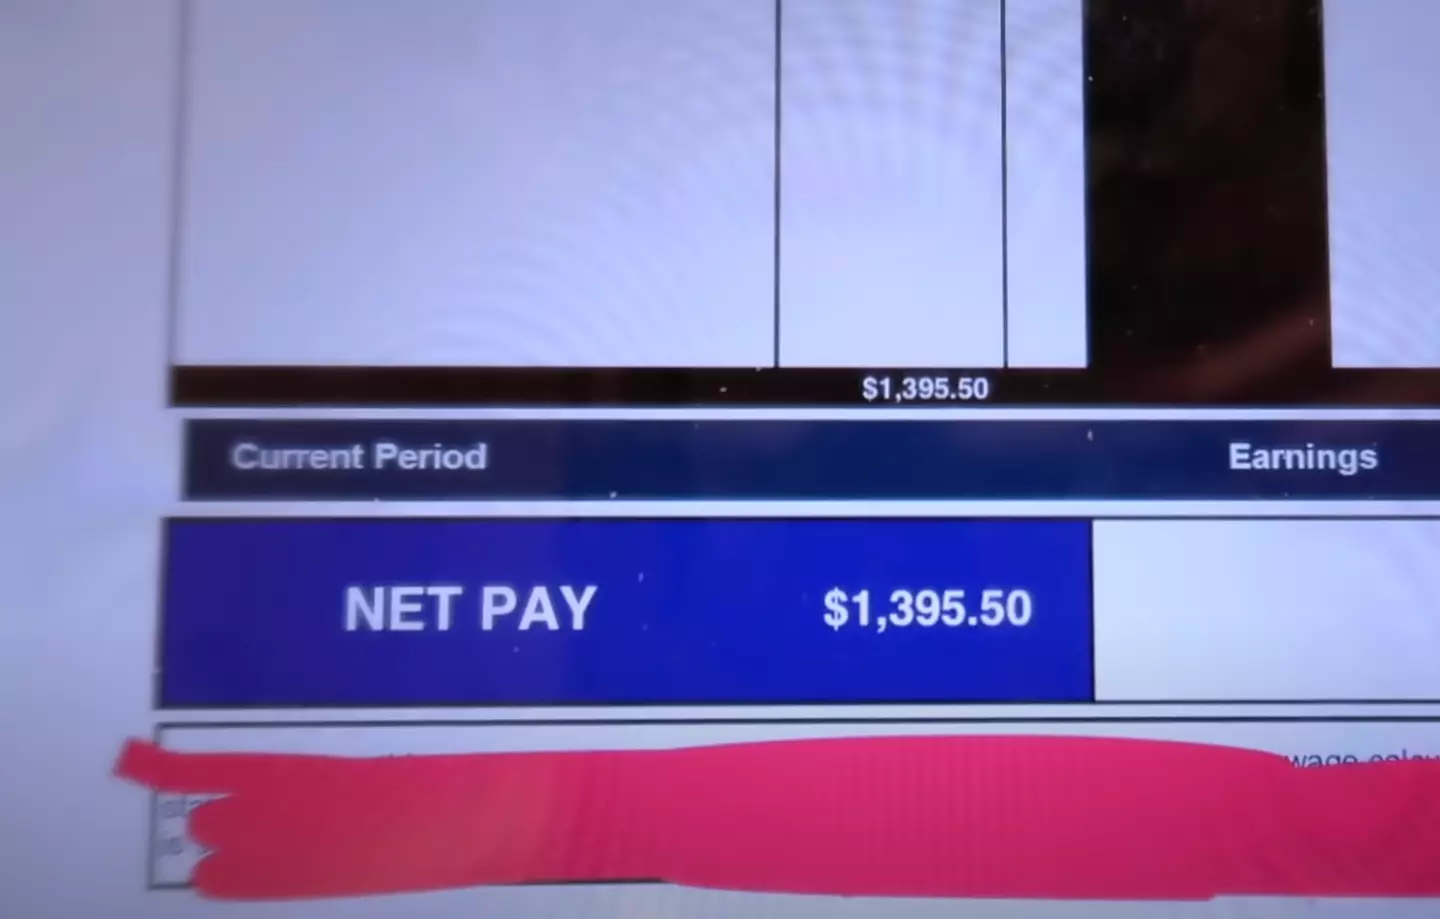 Despite earning $2790 a month from his cruise ship job, his YouTube earnings add even more to that.